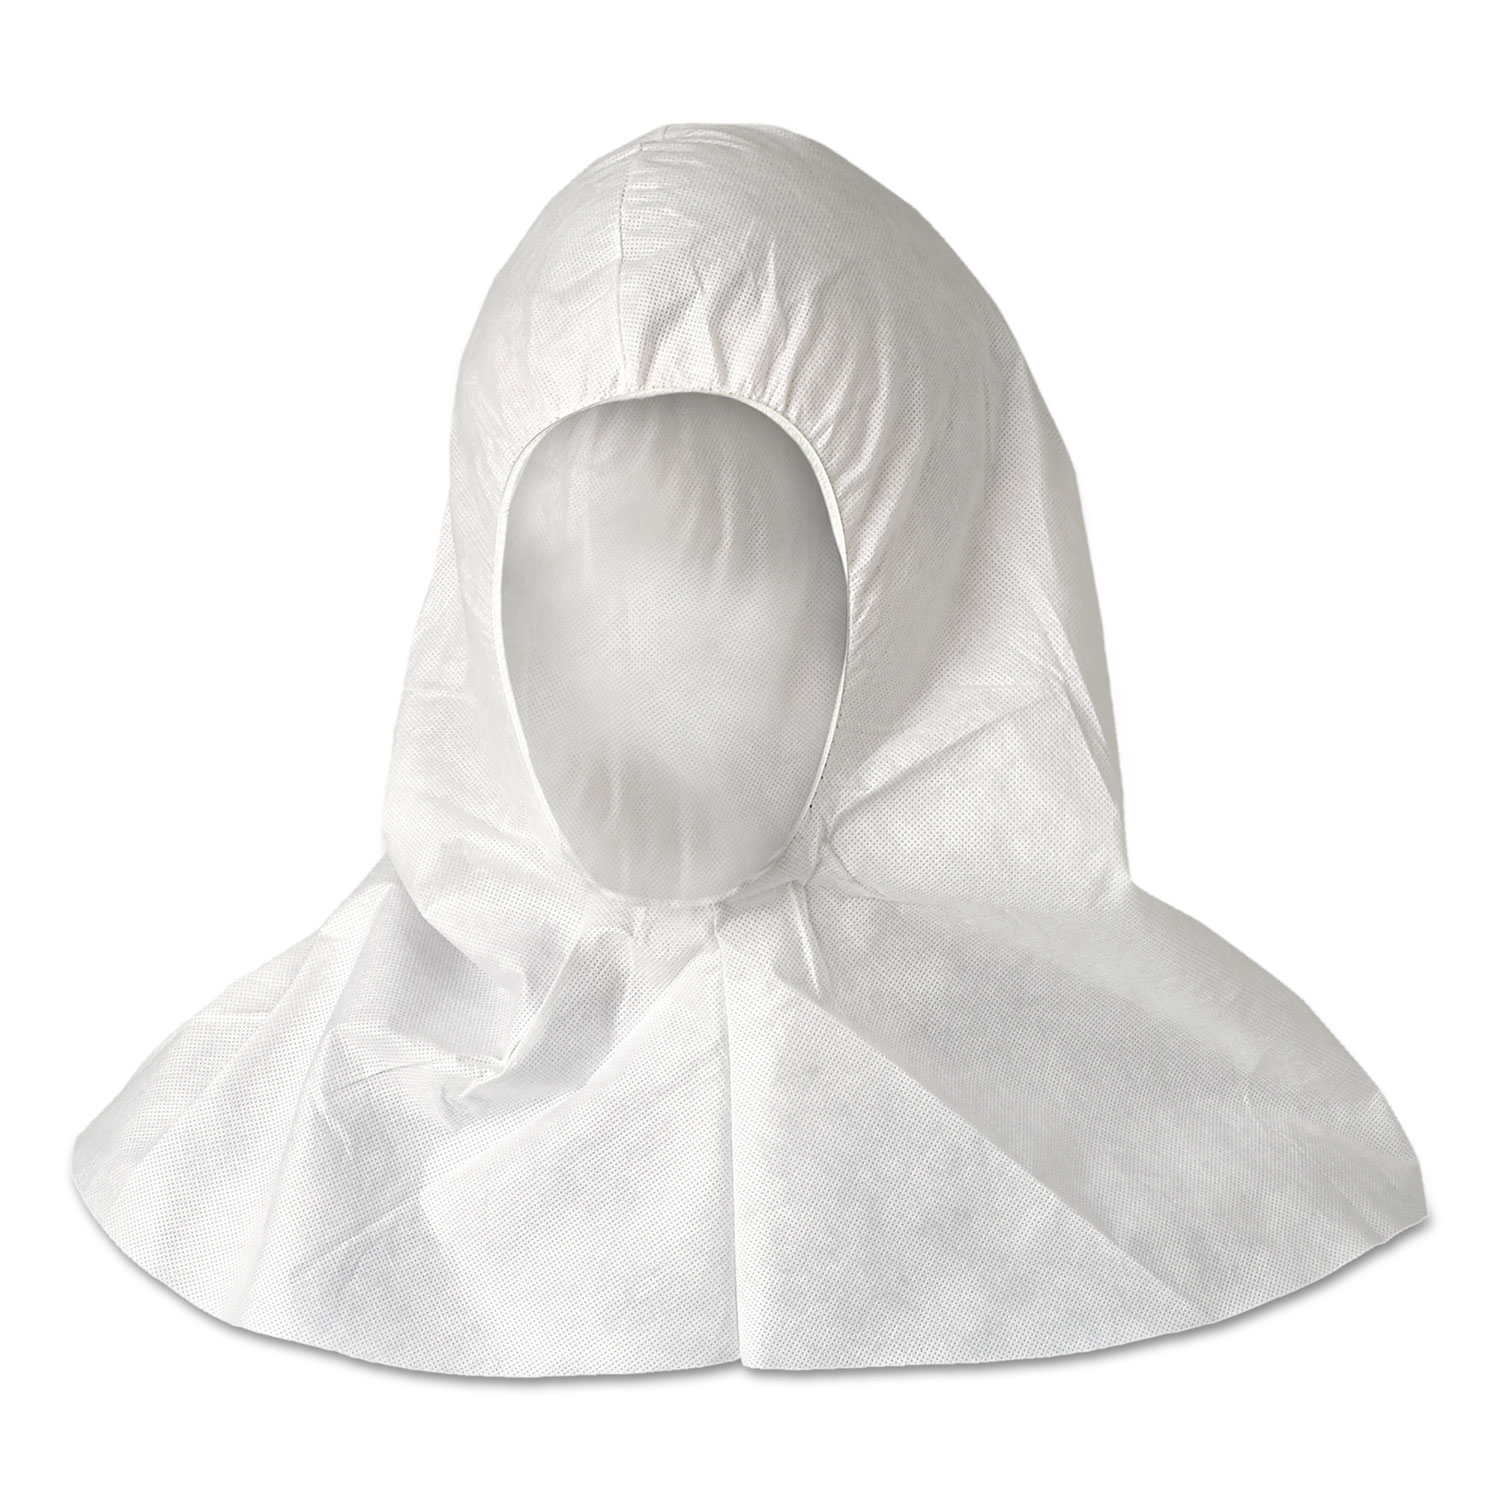 A20 Breathable Particle Protection Hood, White, One Size Fits All, 100/Ctn